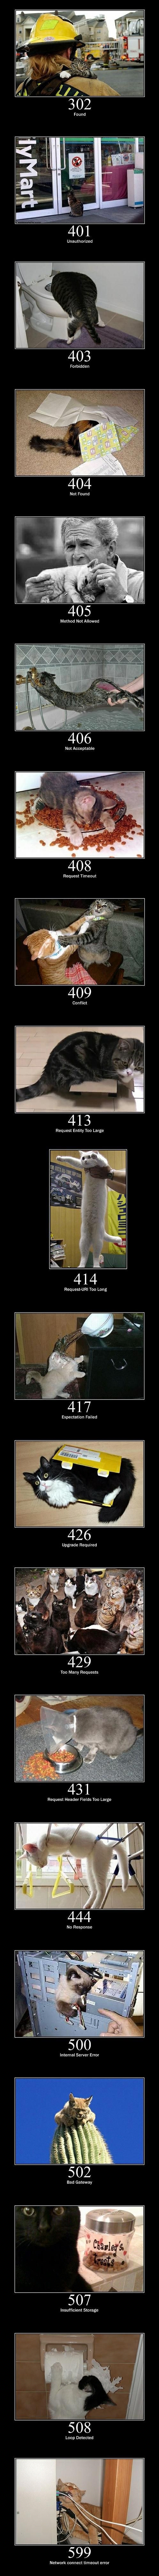 HTTP CATS